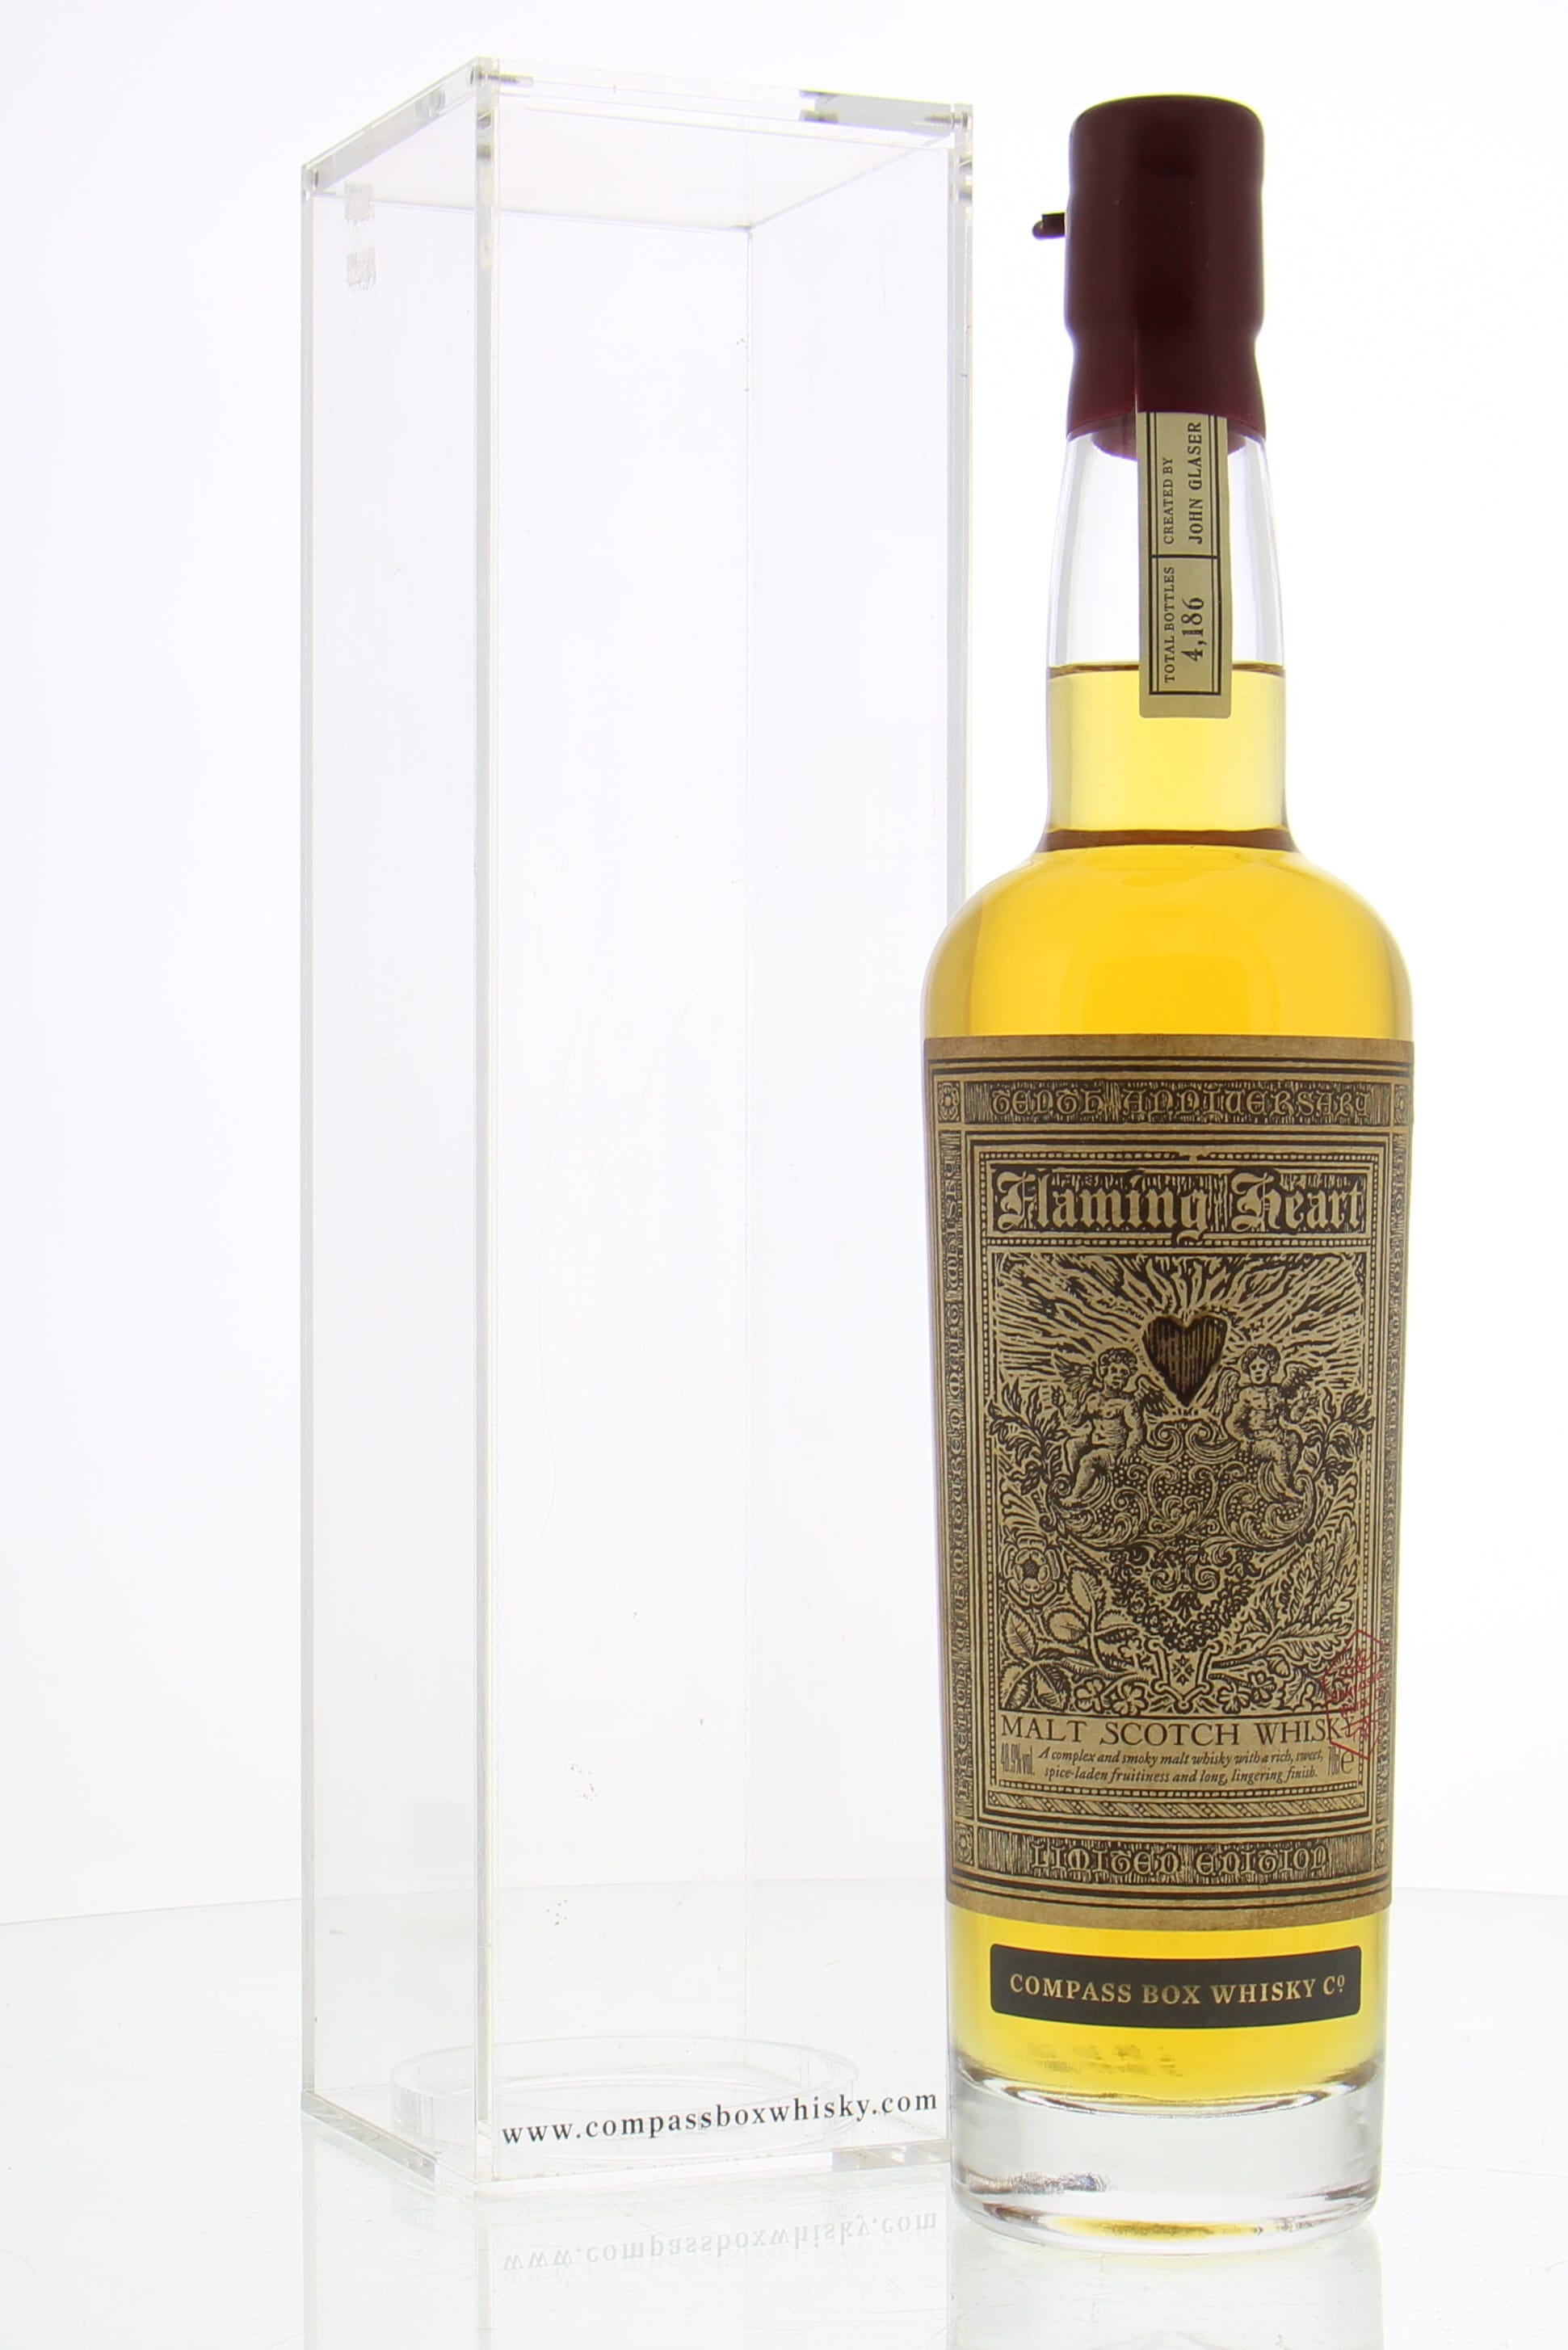 Compass Box - Flaming Heart 10th Anniversary 48.9% NV In Original Container